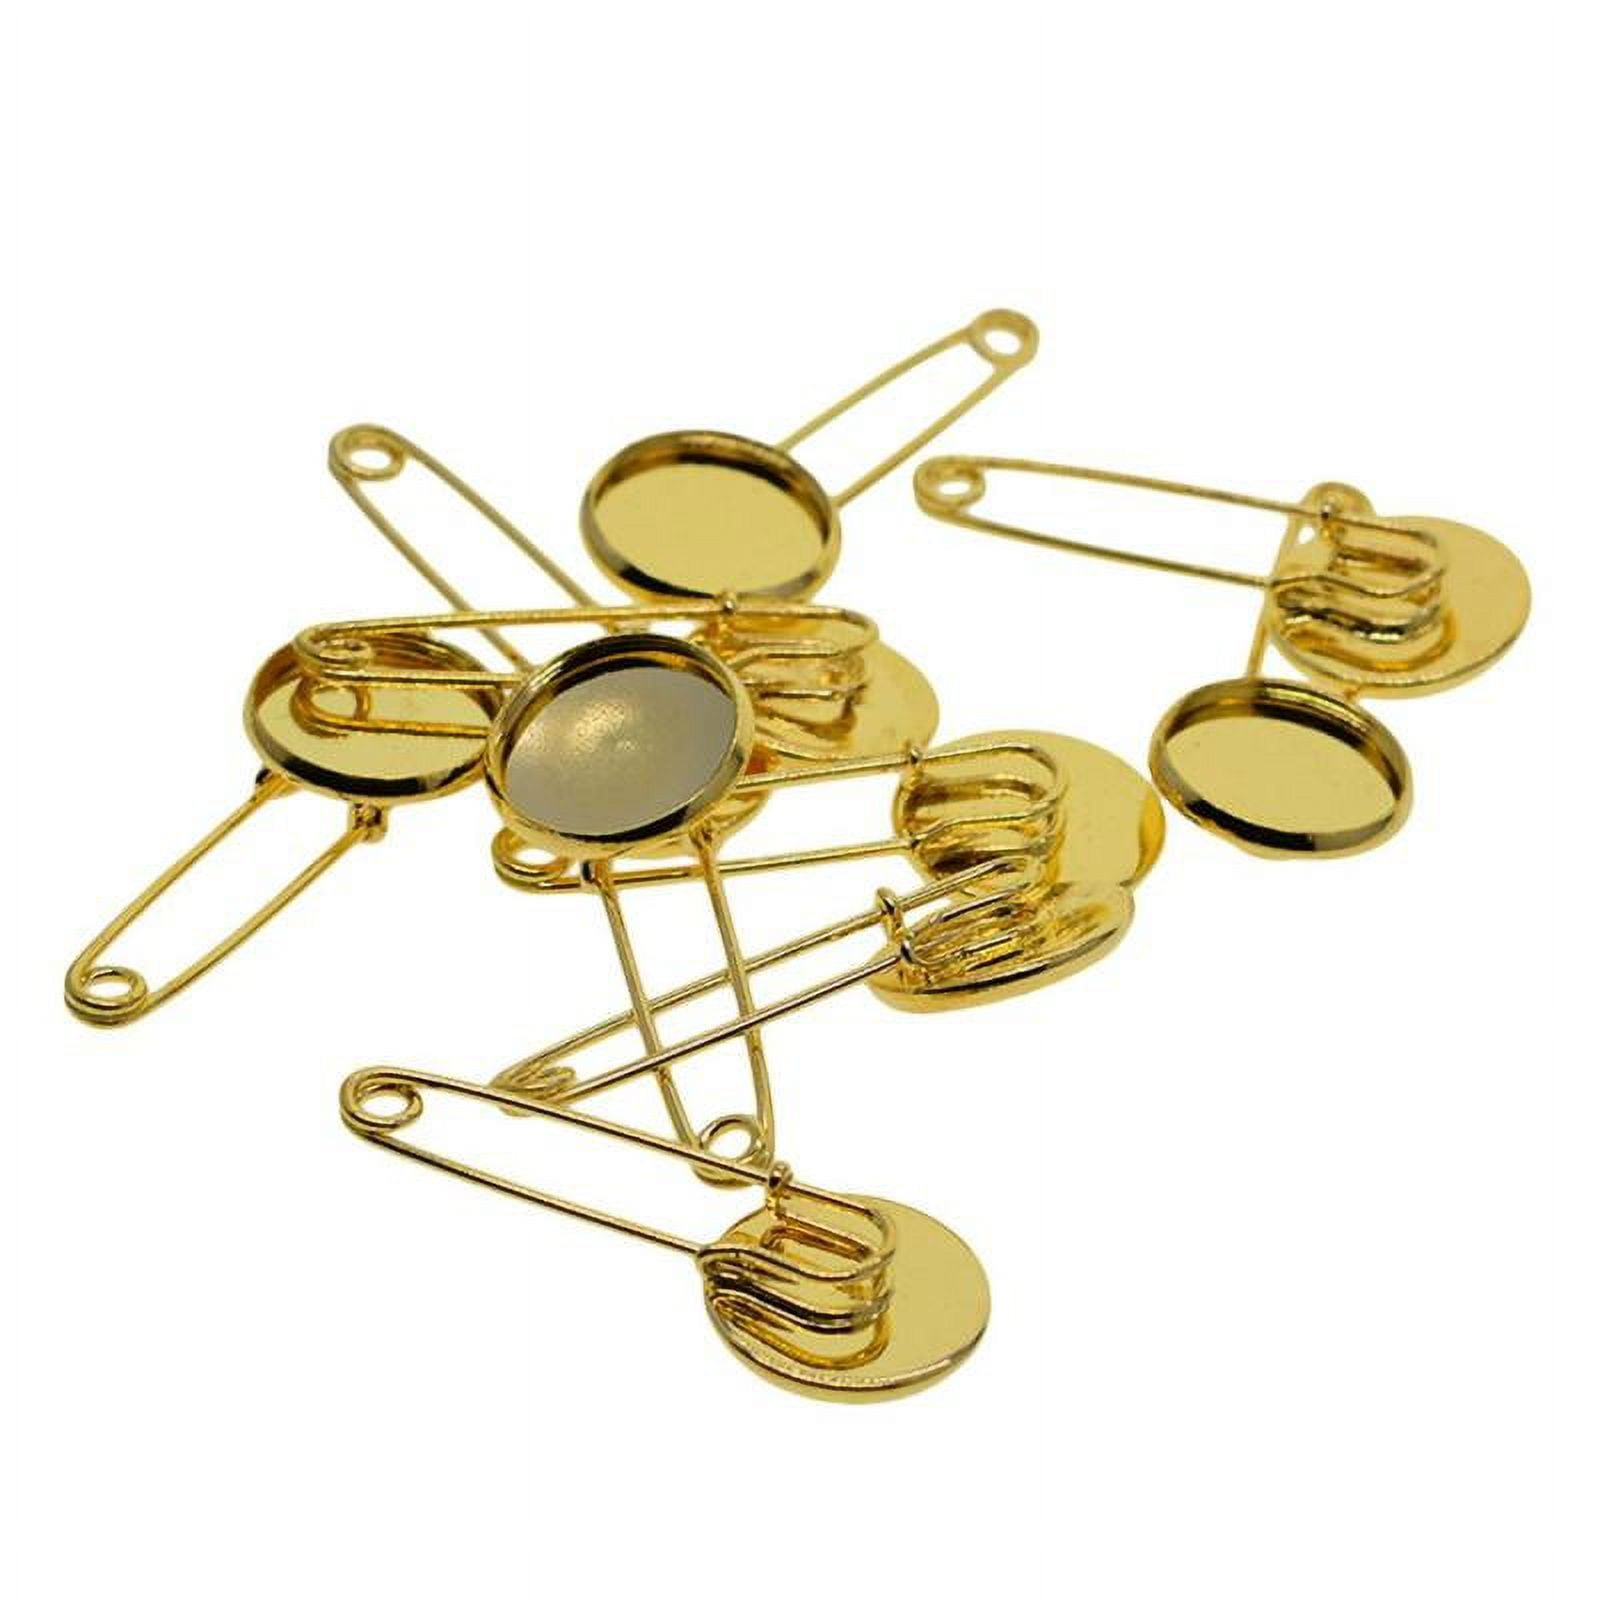 ZPAQI 10Pieces Brooch Pins 5 Holes for Brooch Making Blankets Sewing Crafts  Jewelry 